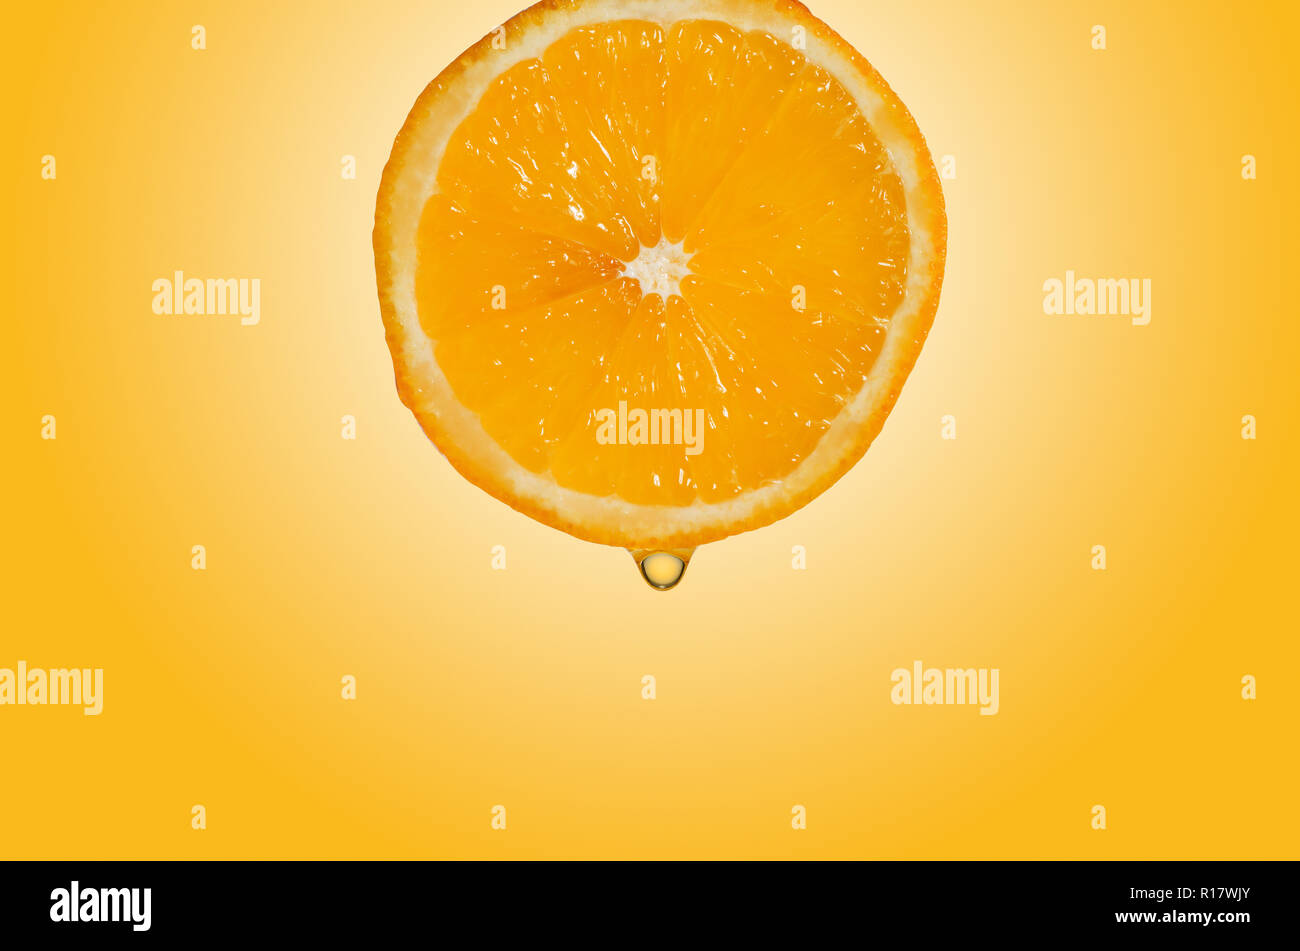 Close up view of orange slice with droplet of juice, yellow background Stock Photo